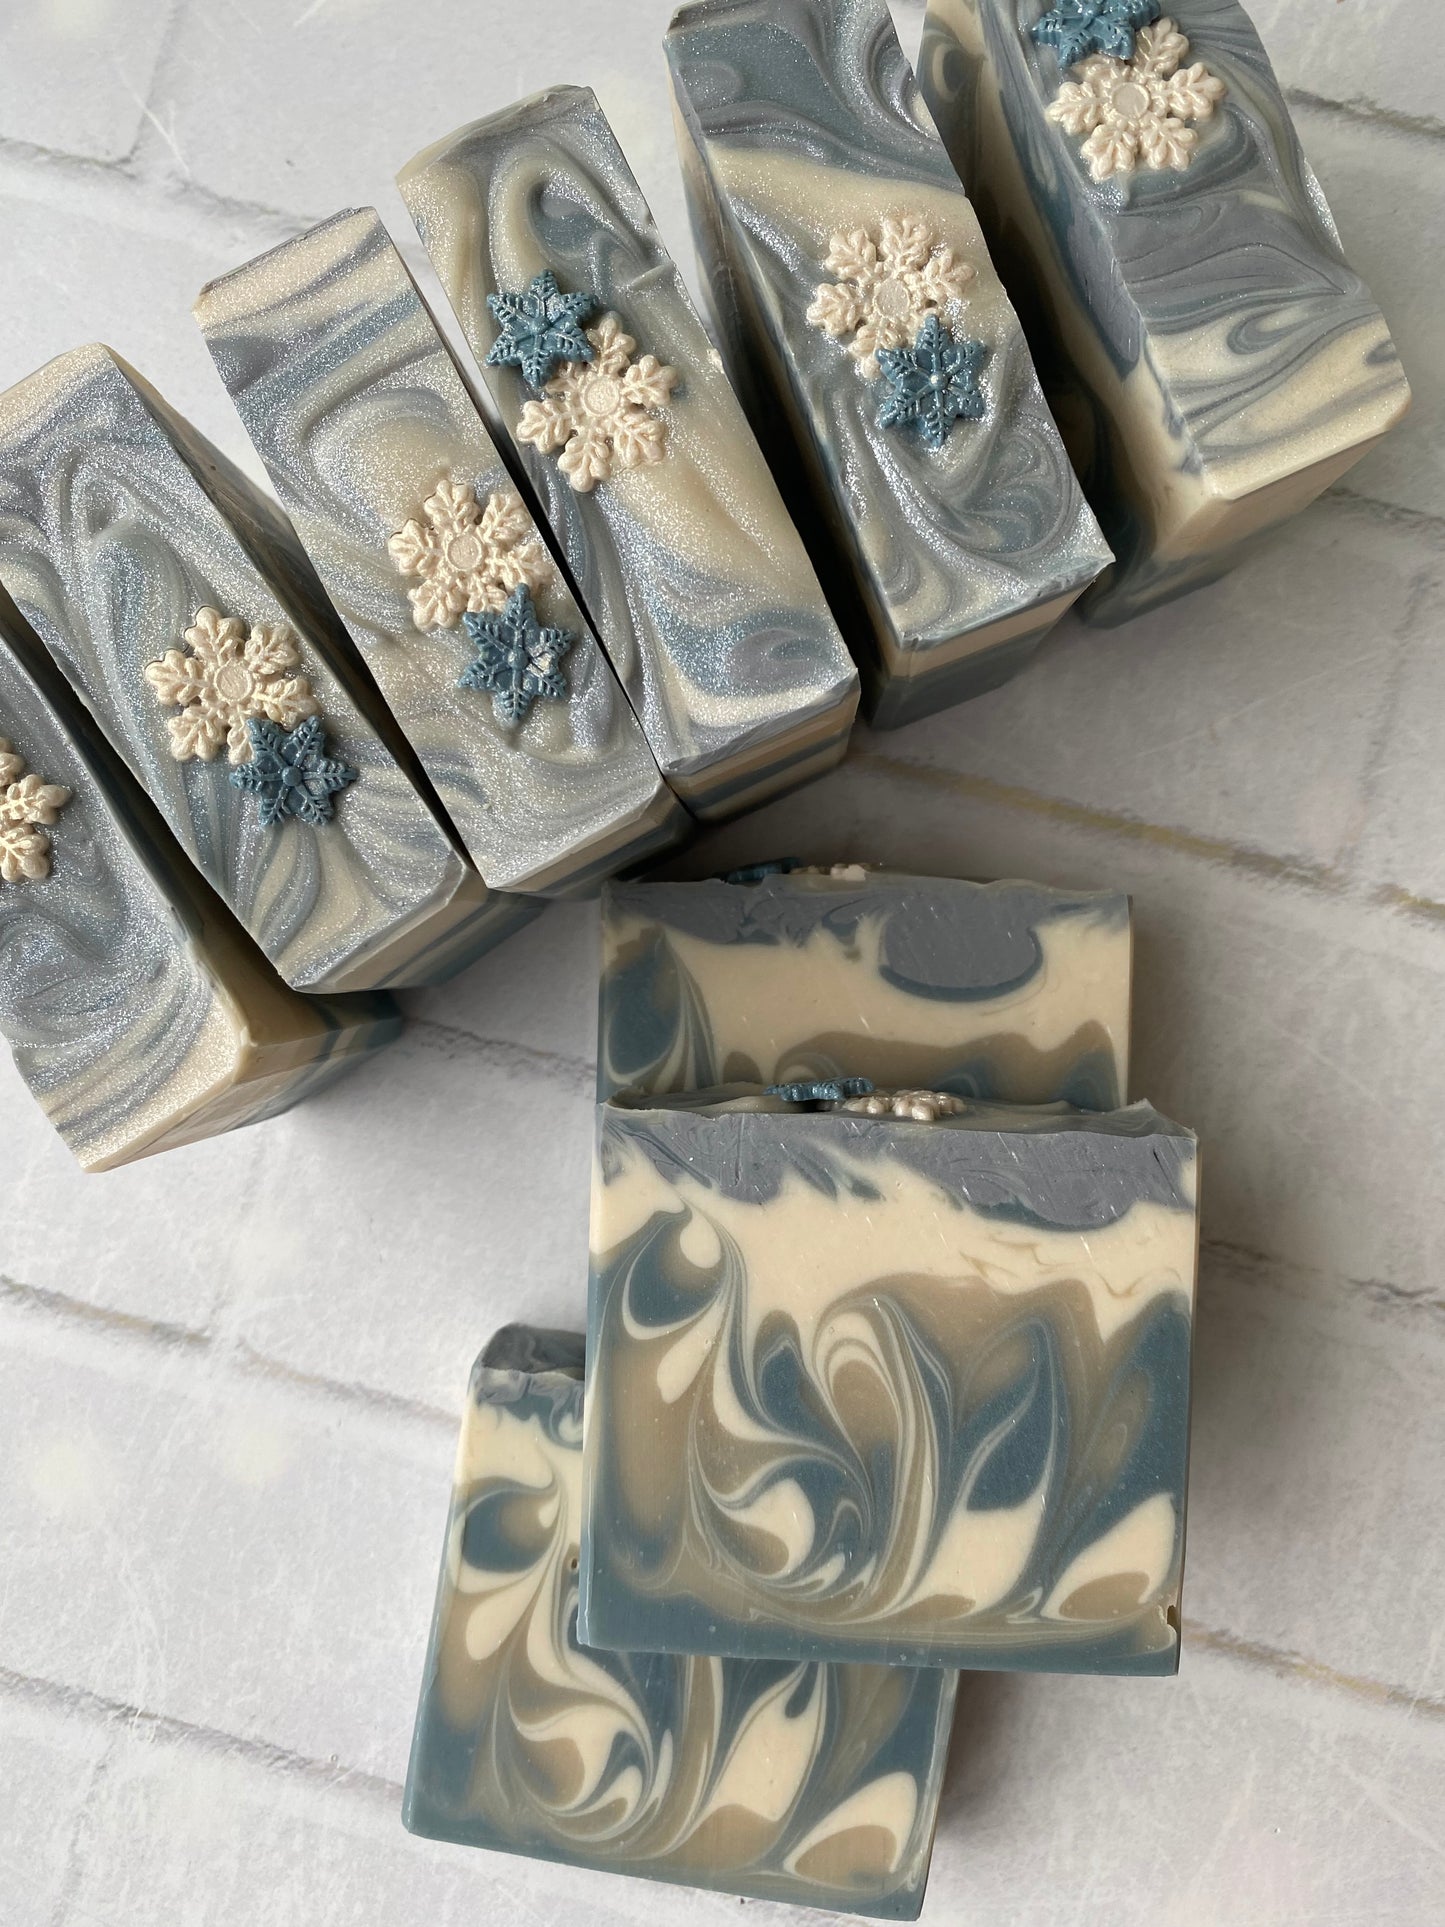 Snowflakes & Cashmere | Vegan Coconut Milk & Shea Butter Soap Bar | Winter Holiday